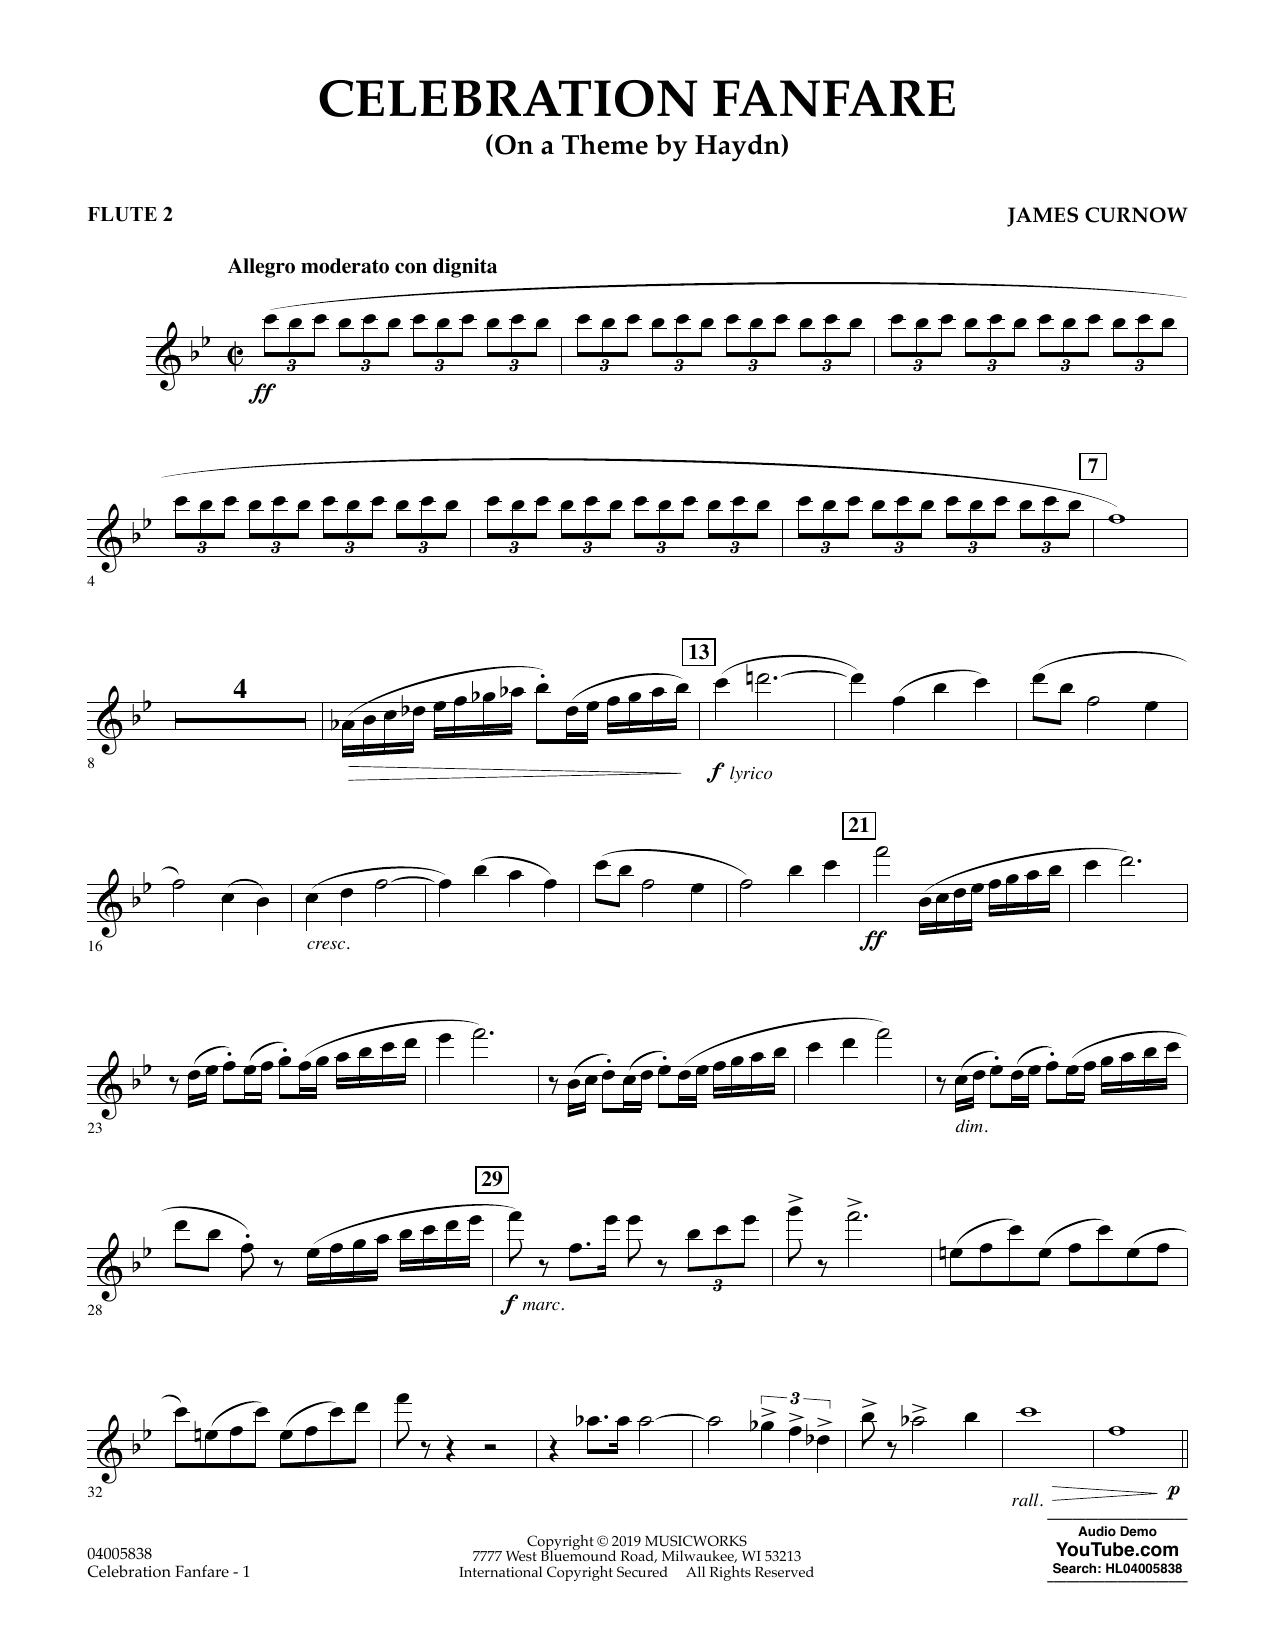 James Curnow Celebration Fanfare (On a Theme by Haydn) - Flute 2 sheet music preview music notes and score for Concert Band including 3 page(s)